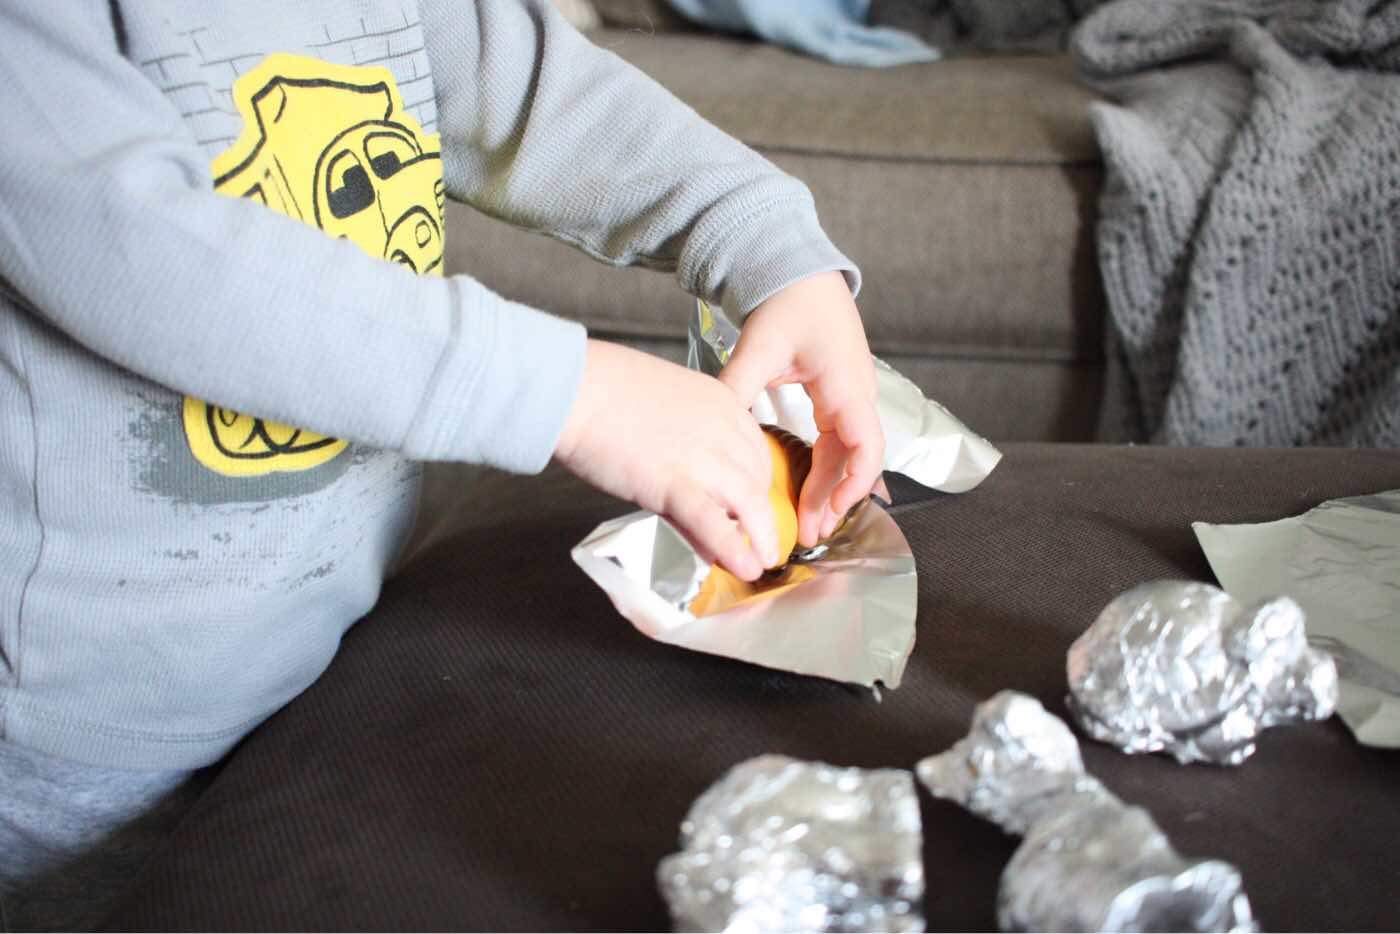 Foil wrapped toys - a simple activity to give old toys new life